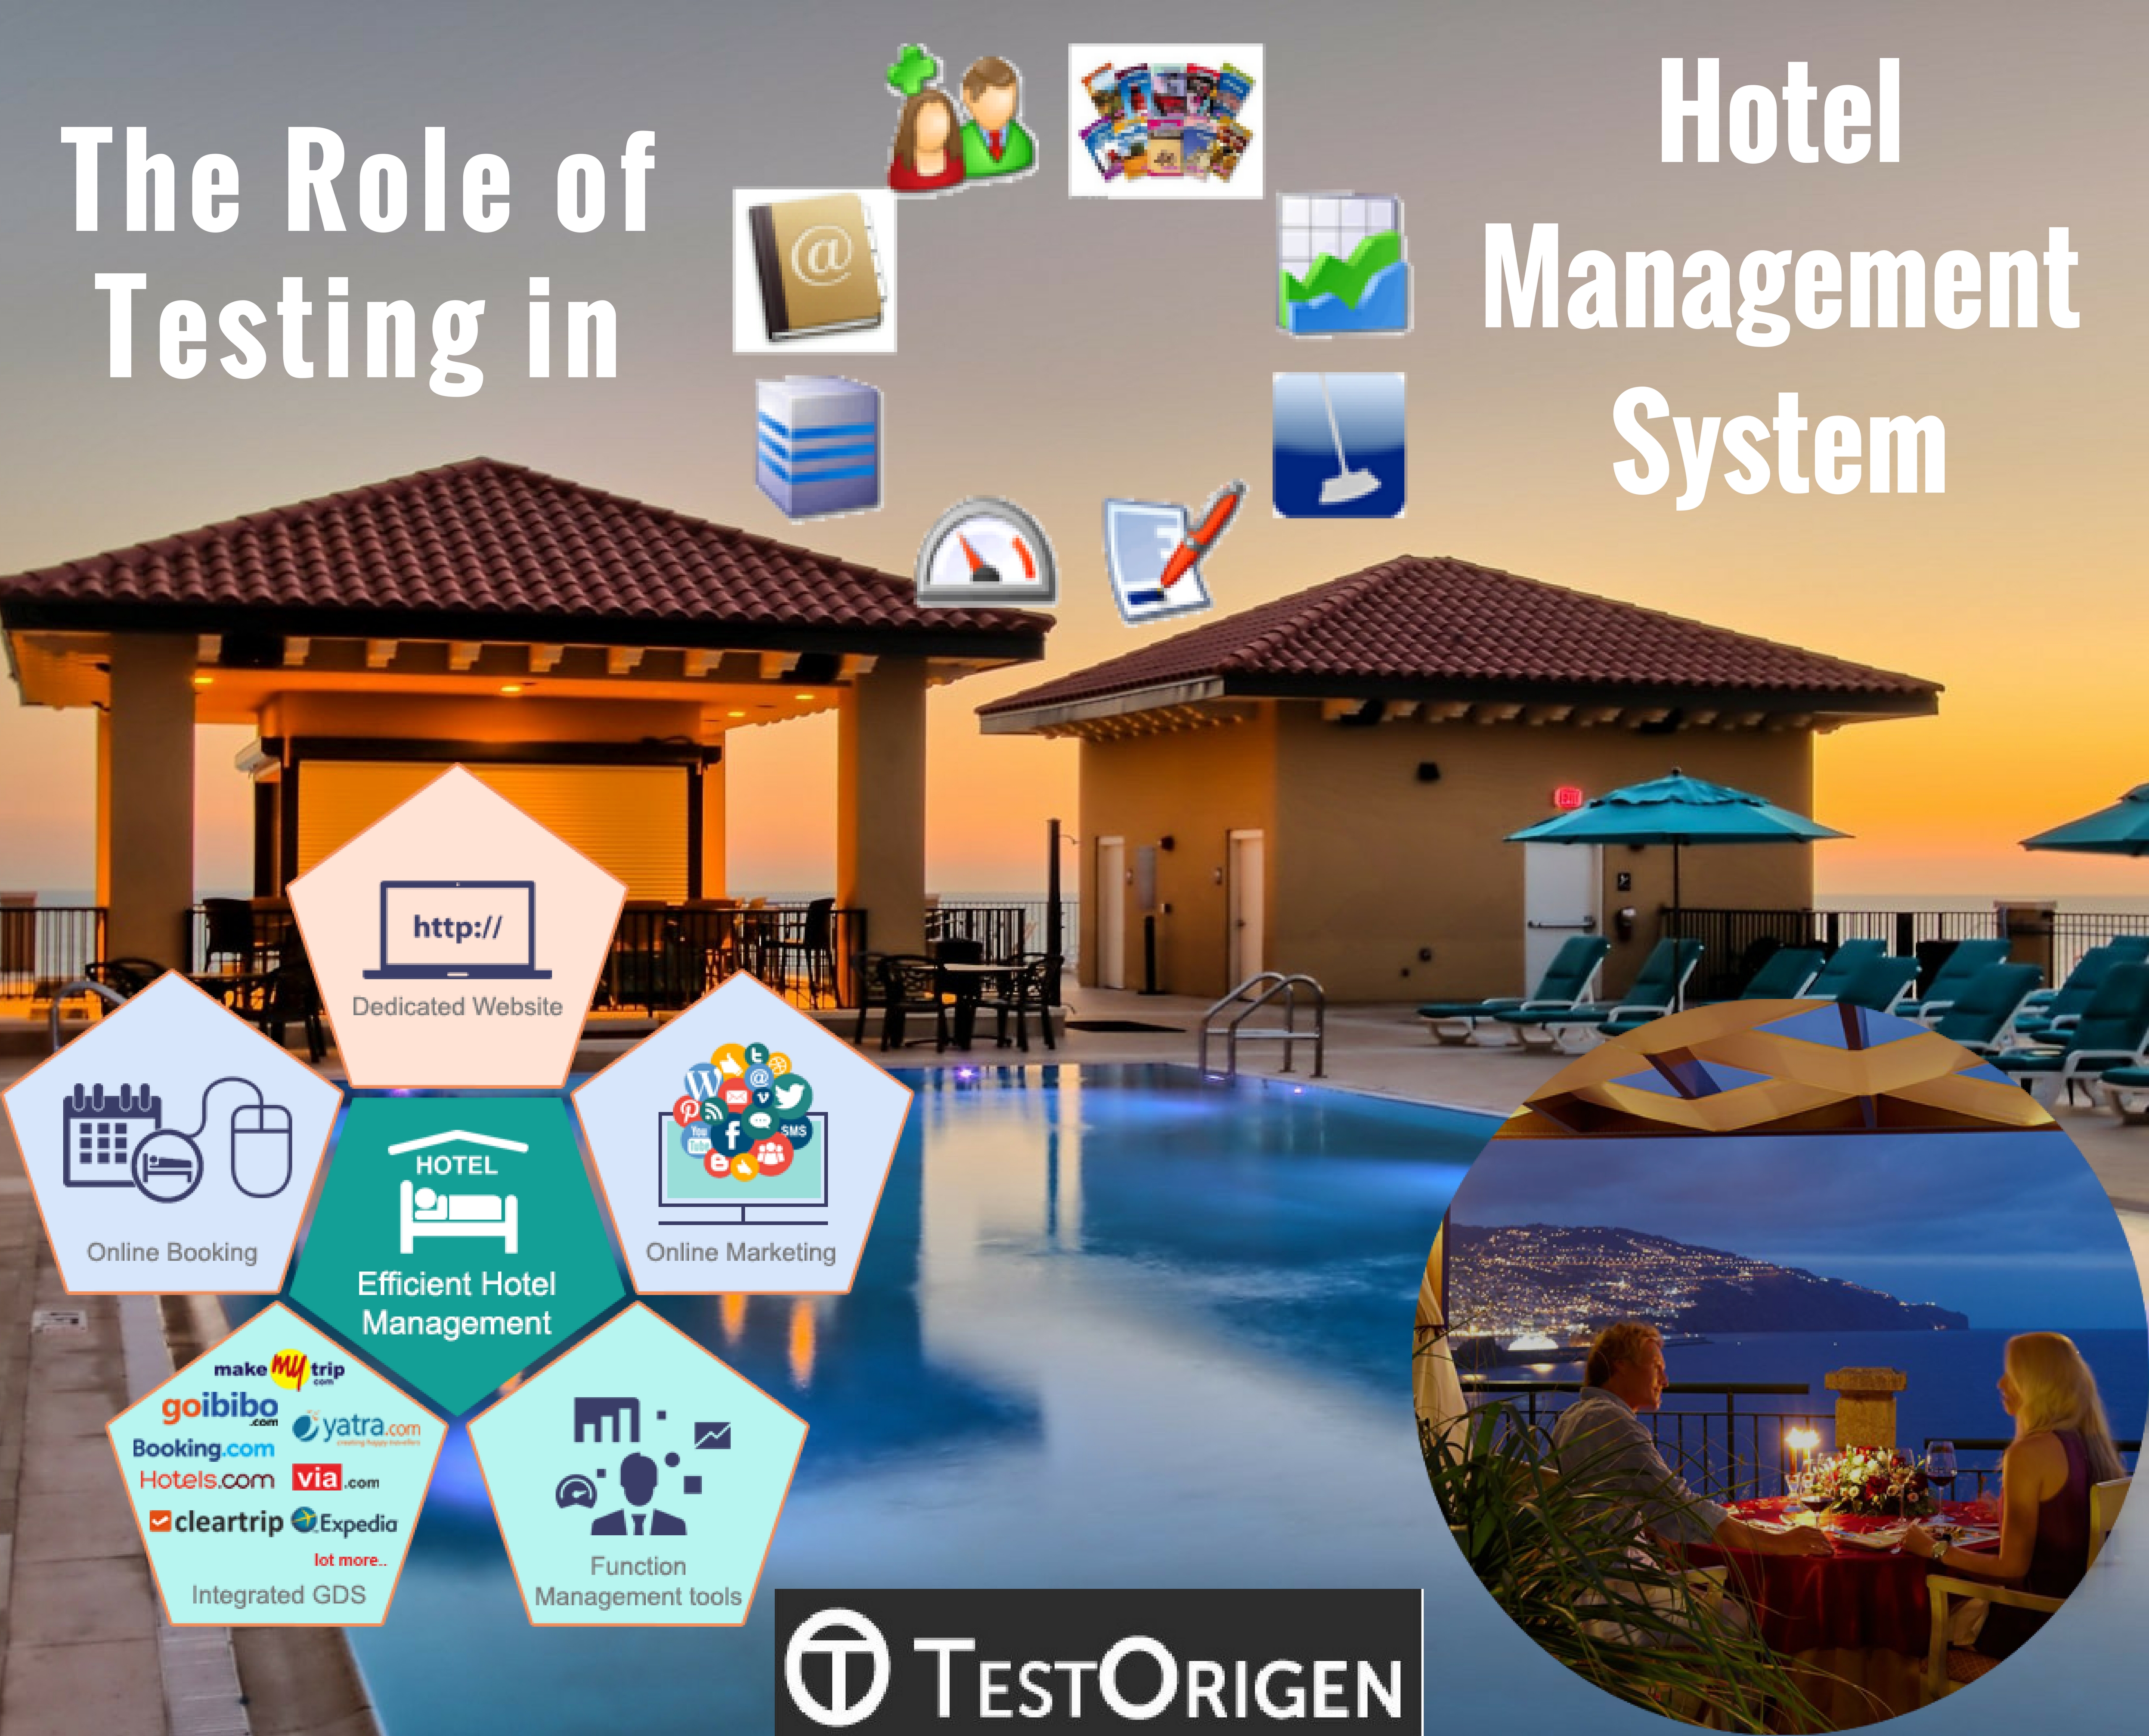 The-Role-of-Testing-in-Hotel-Management-System.jpg